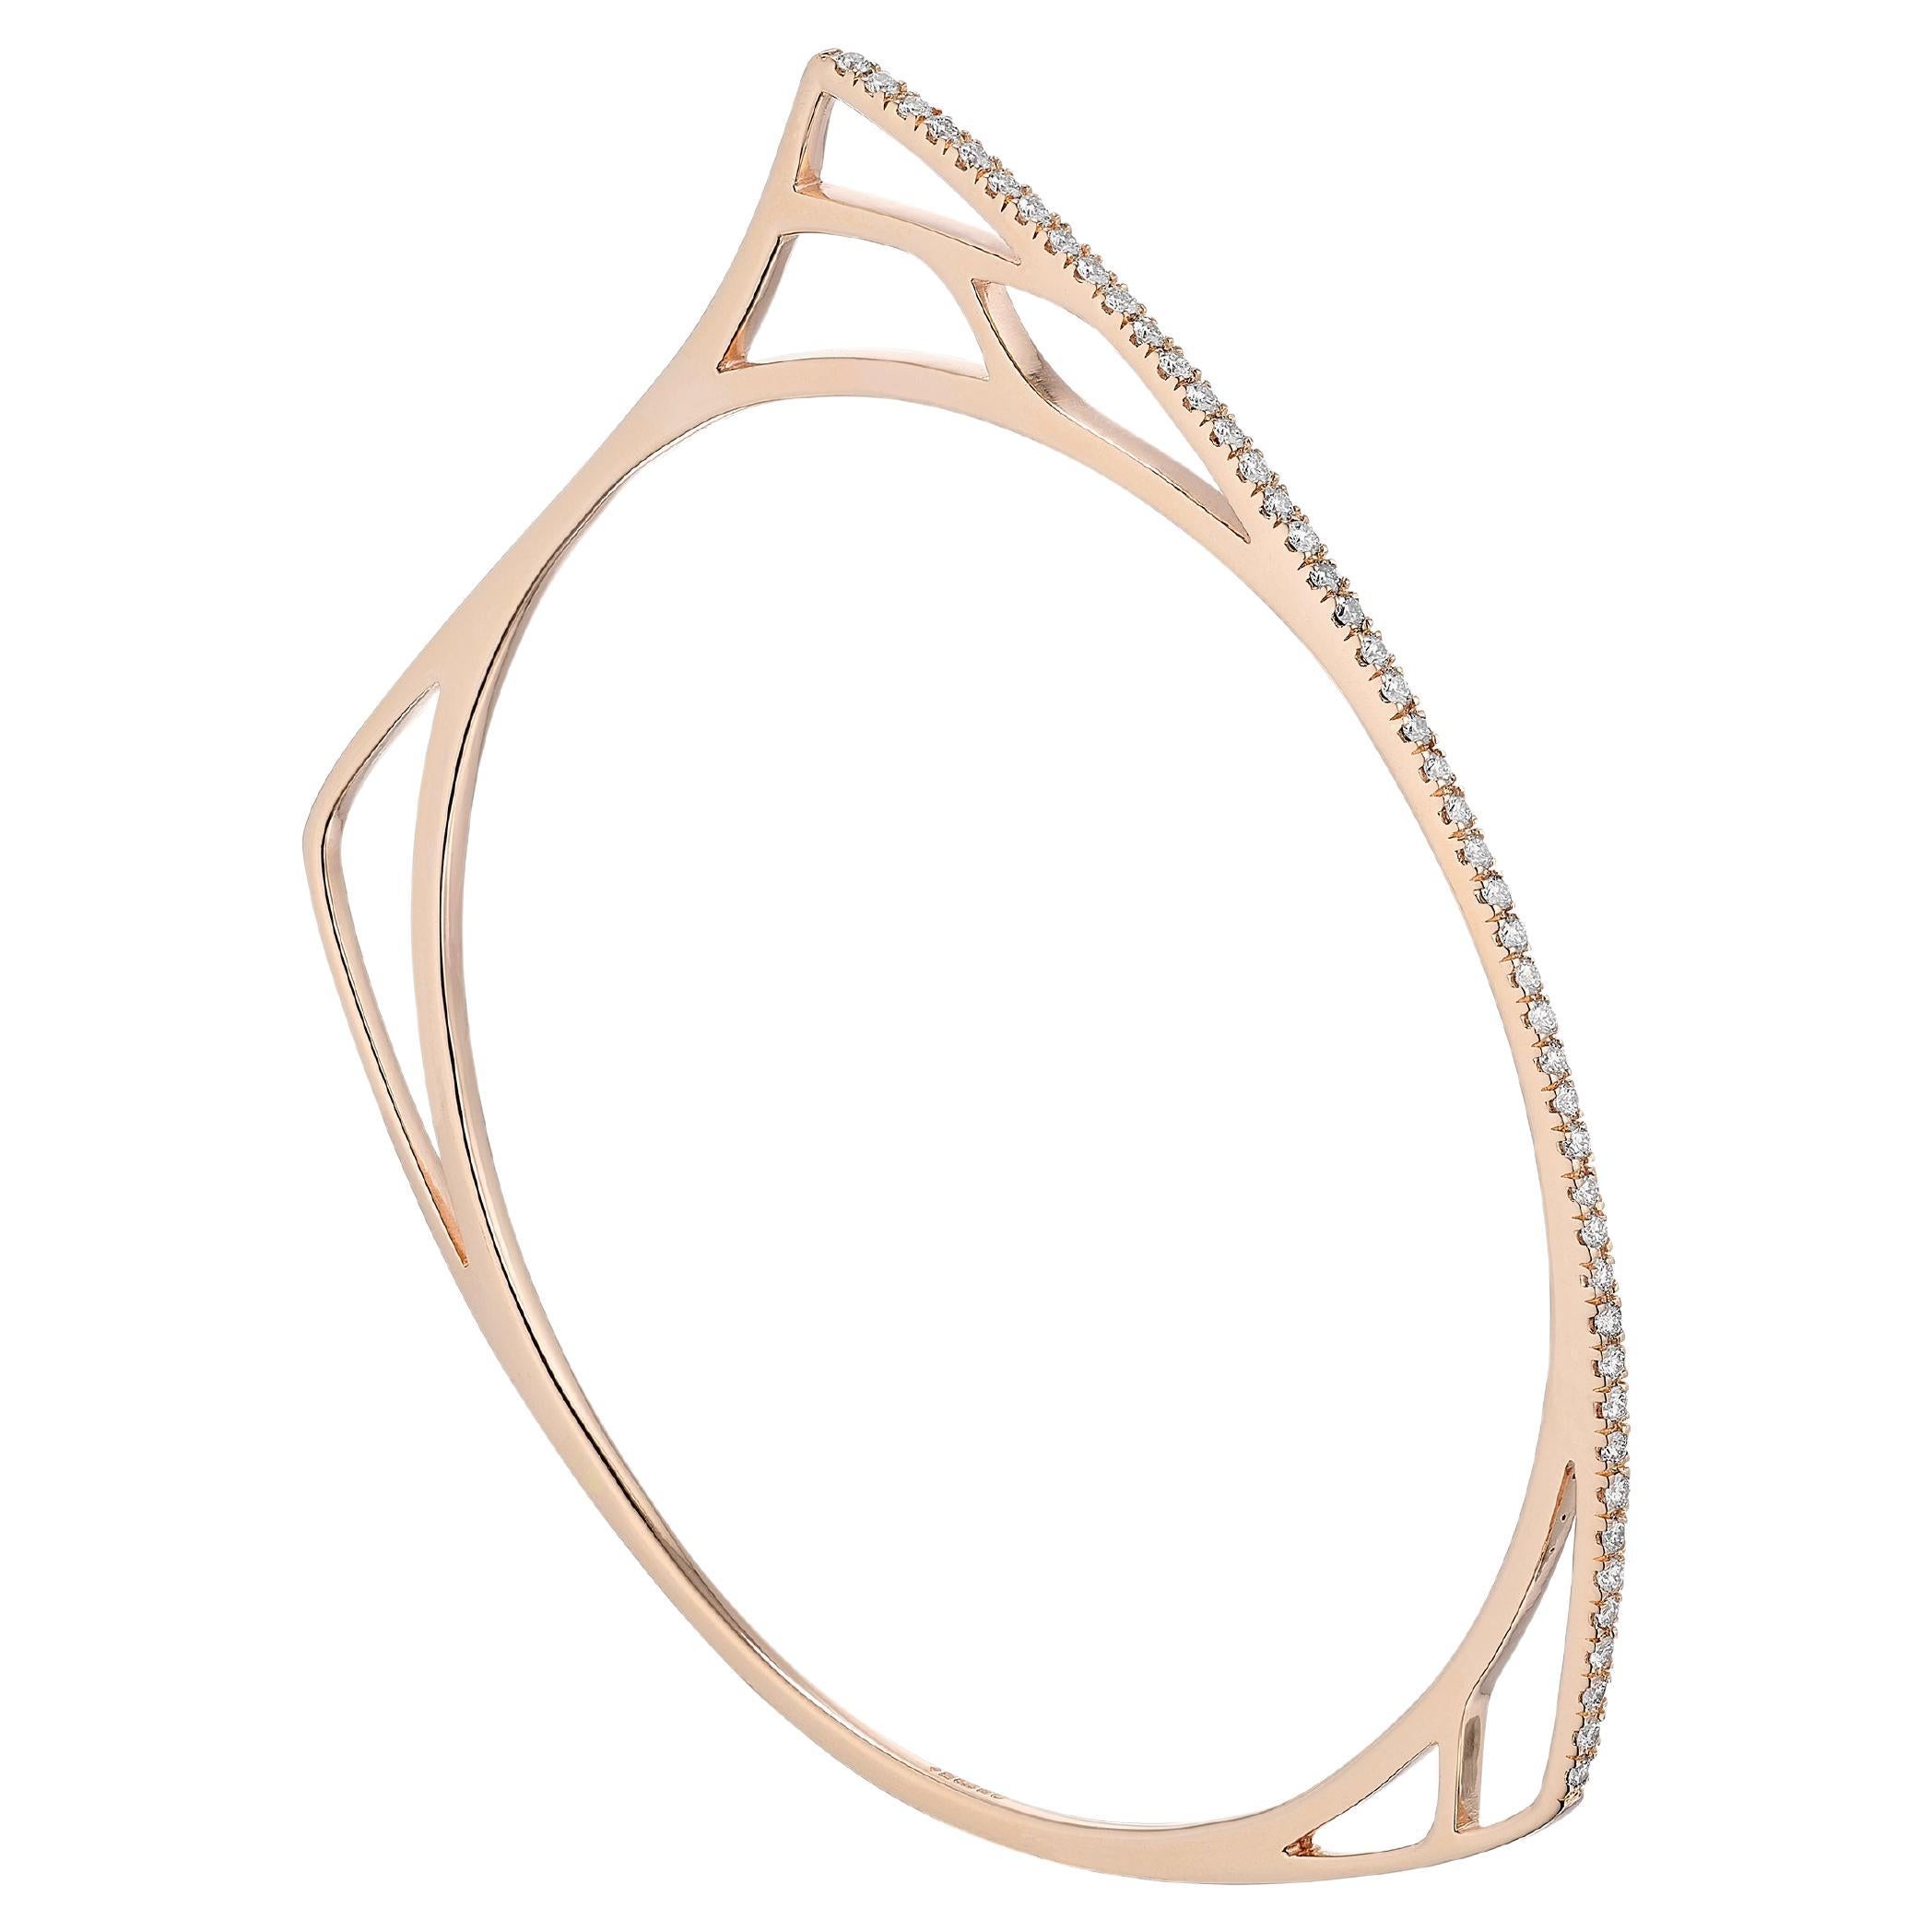 Anabela Chan Fine Sustainable Jewelry Rose Gold Diamond Morpho Bracelet 2 Size M For Sale